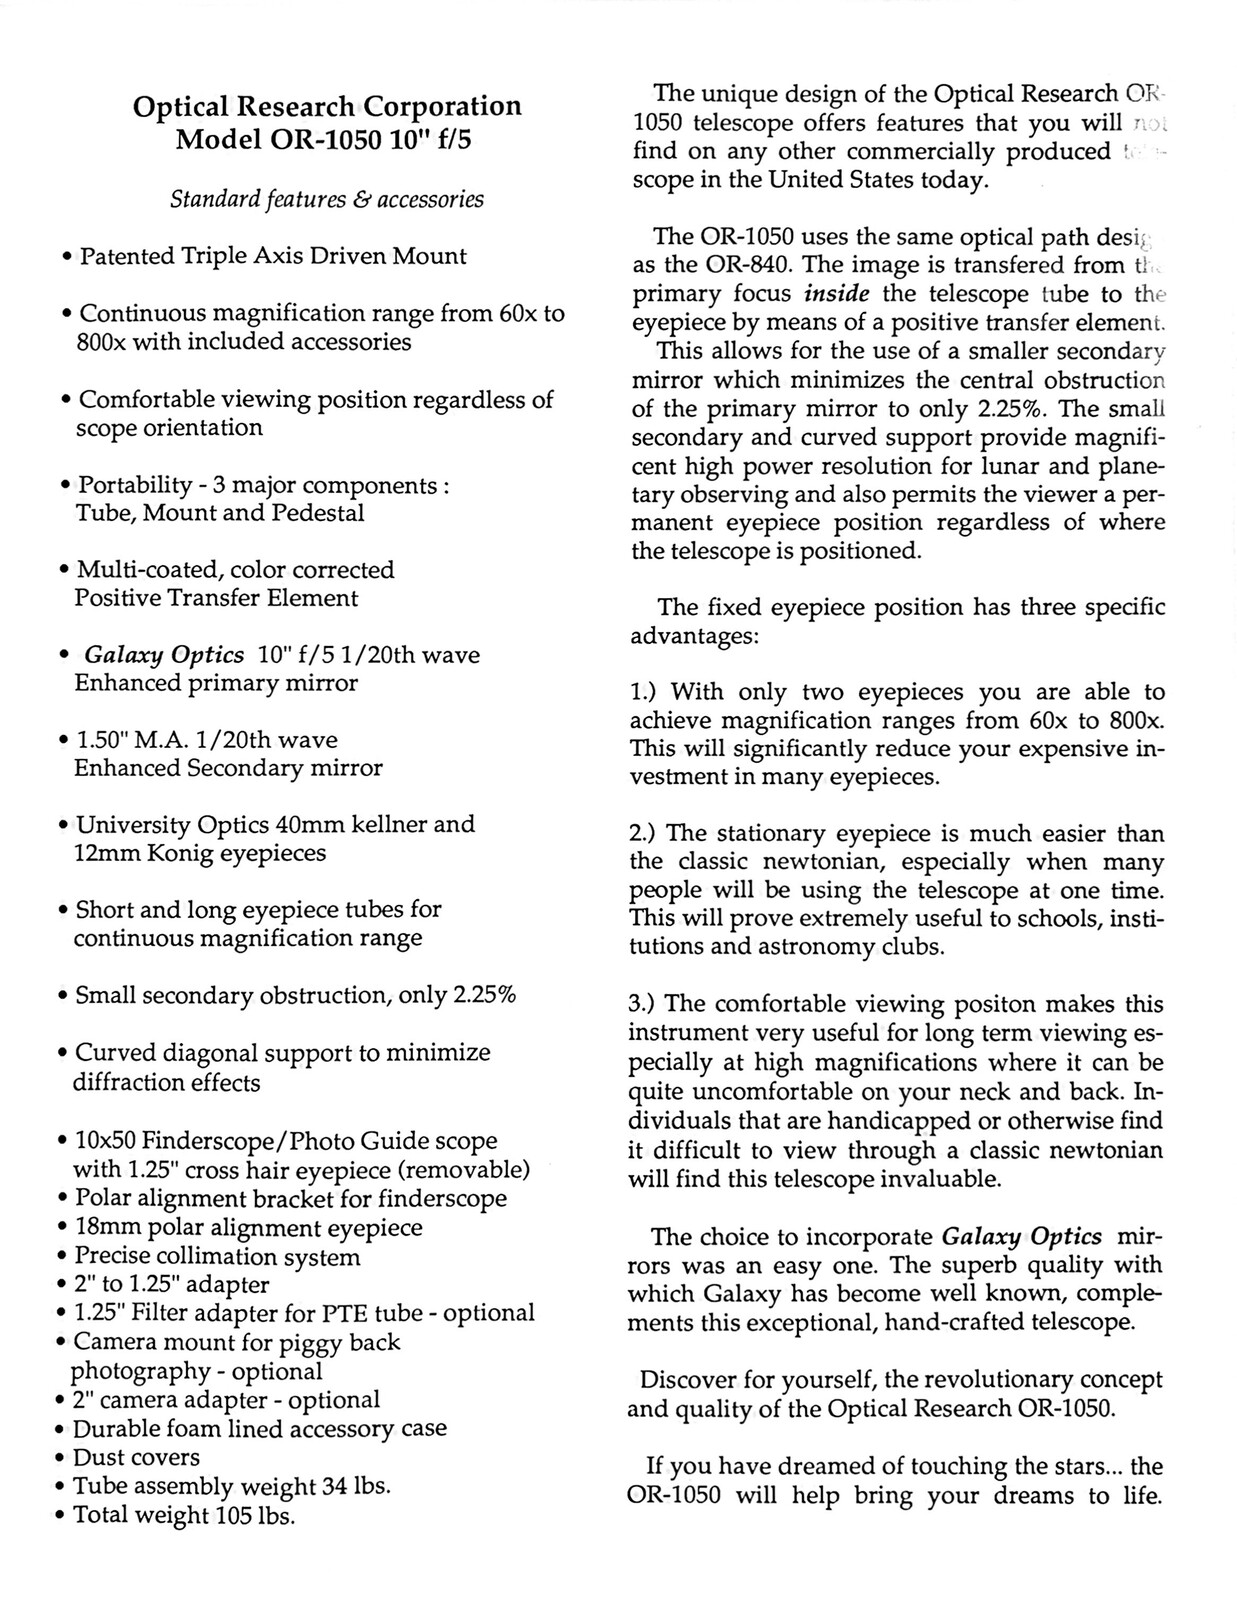 OR 1050 Fact Sheet page 2